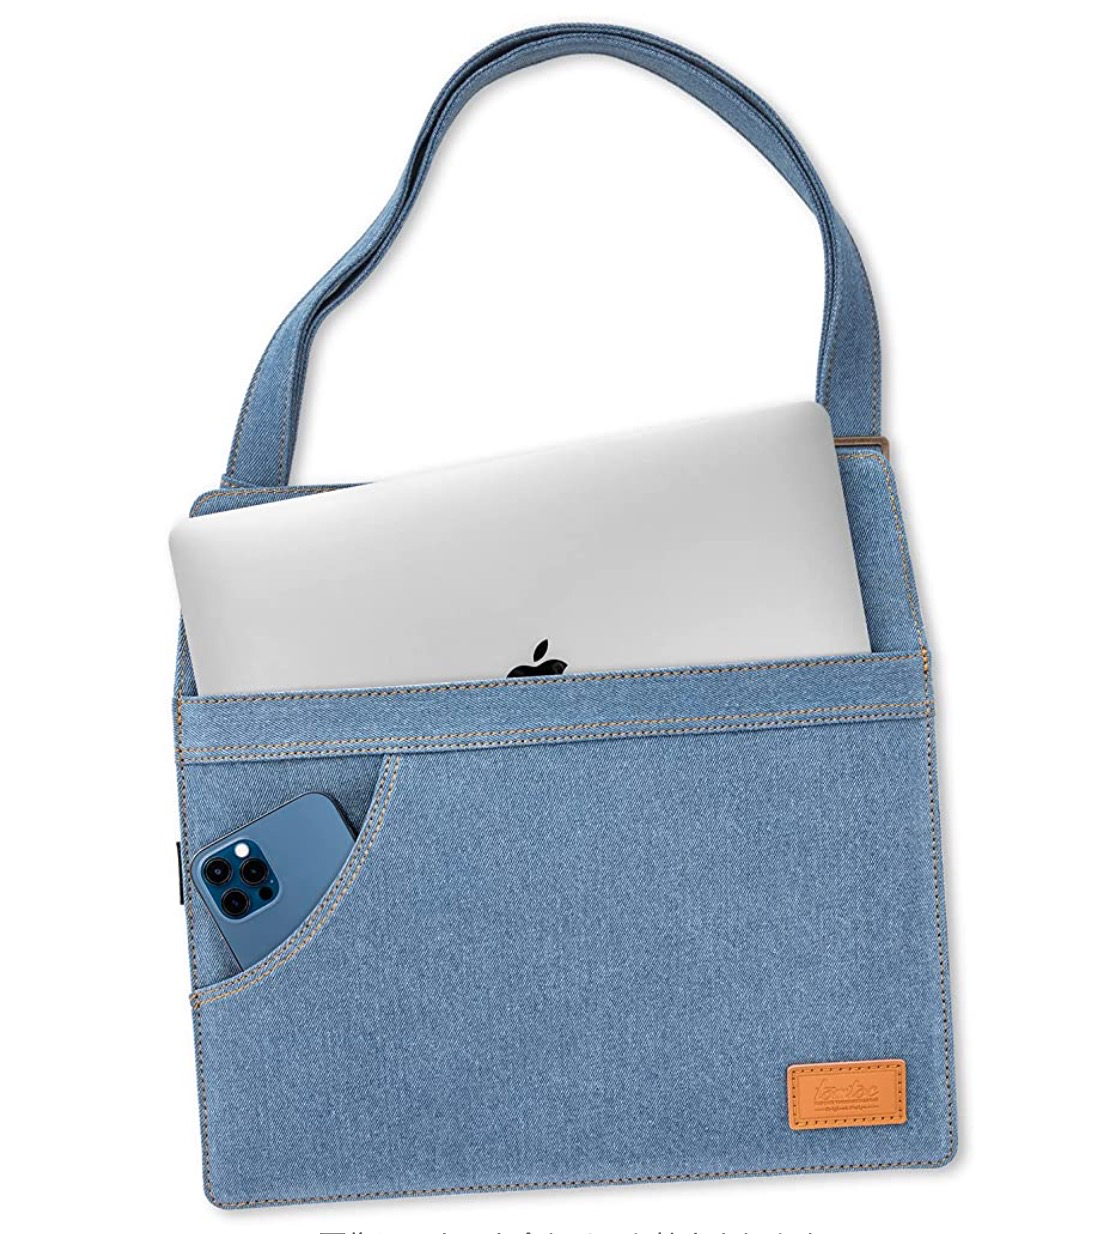 tomtoc Denim Lady Laptop Shoulder Bag For 13-inch MacBook Air And Pro